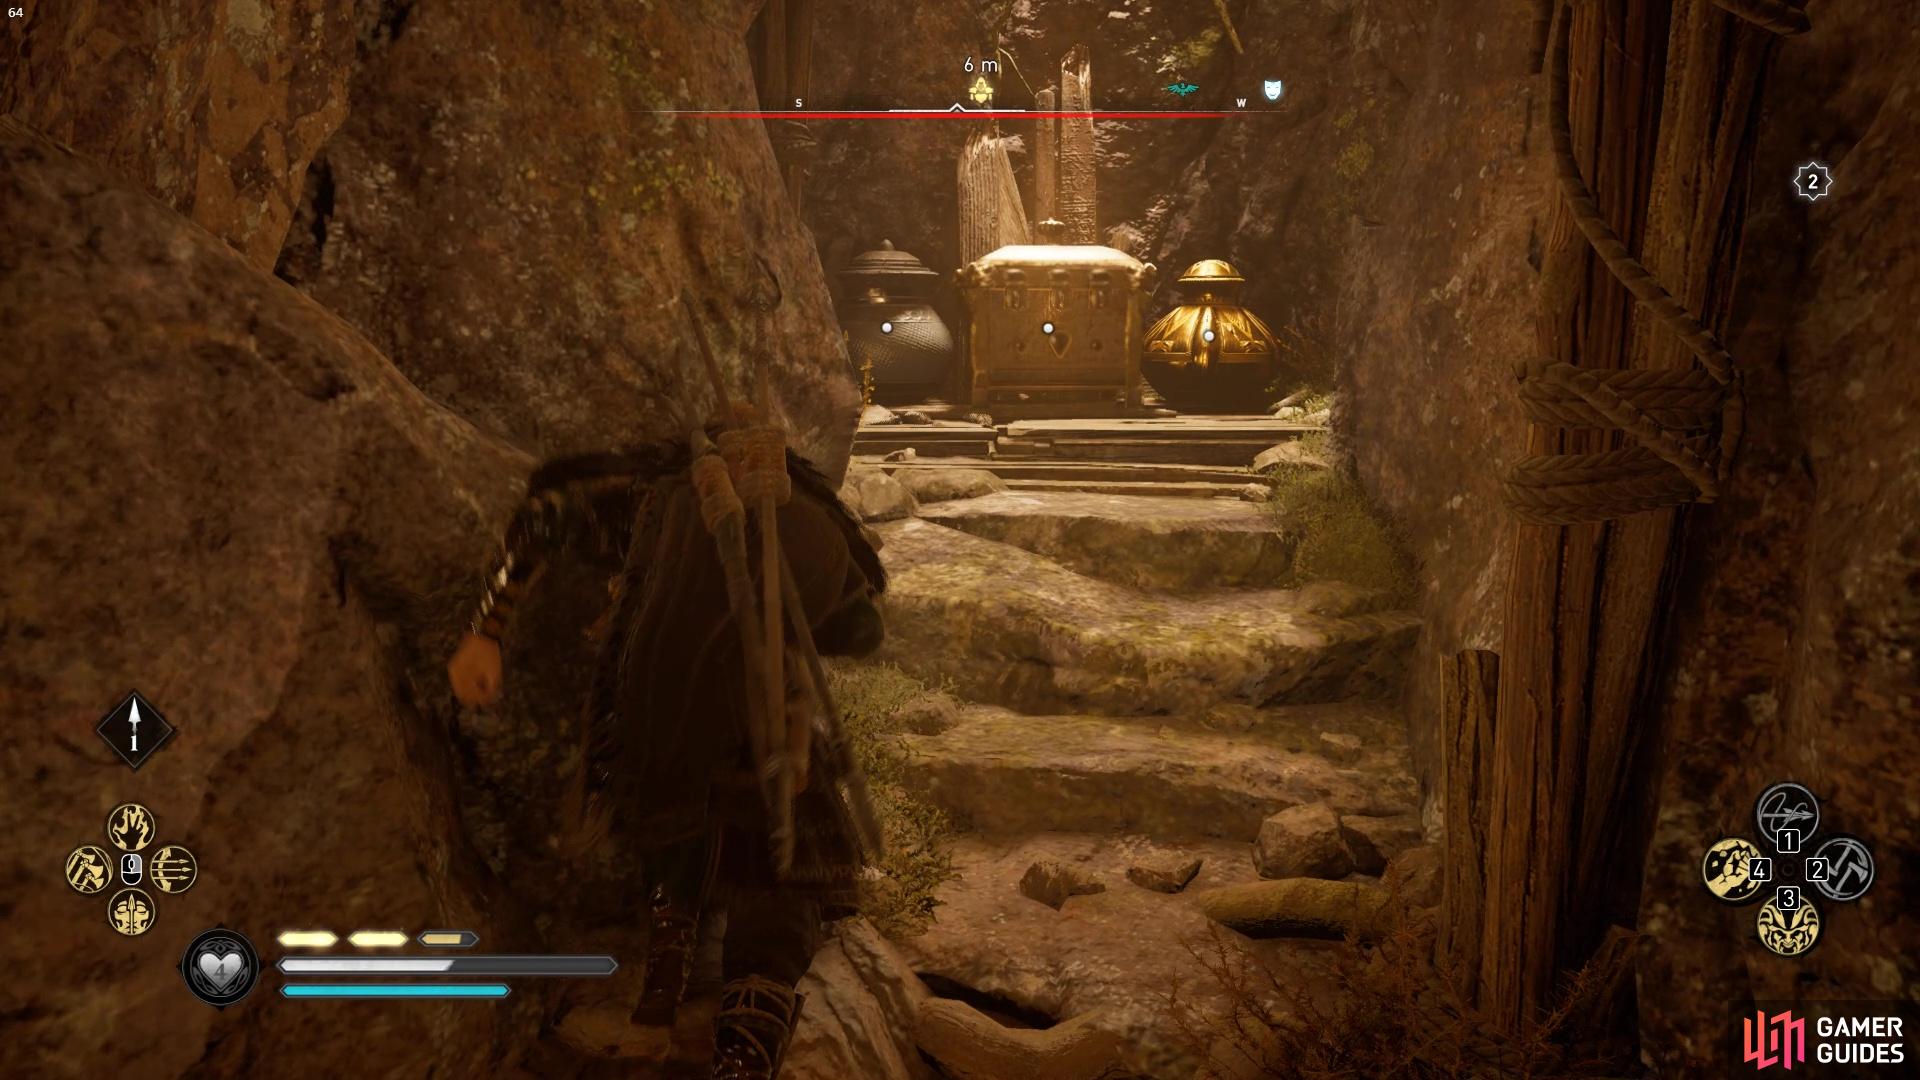 the armor is found within the cave.